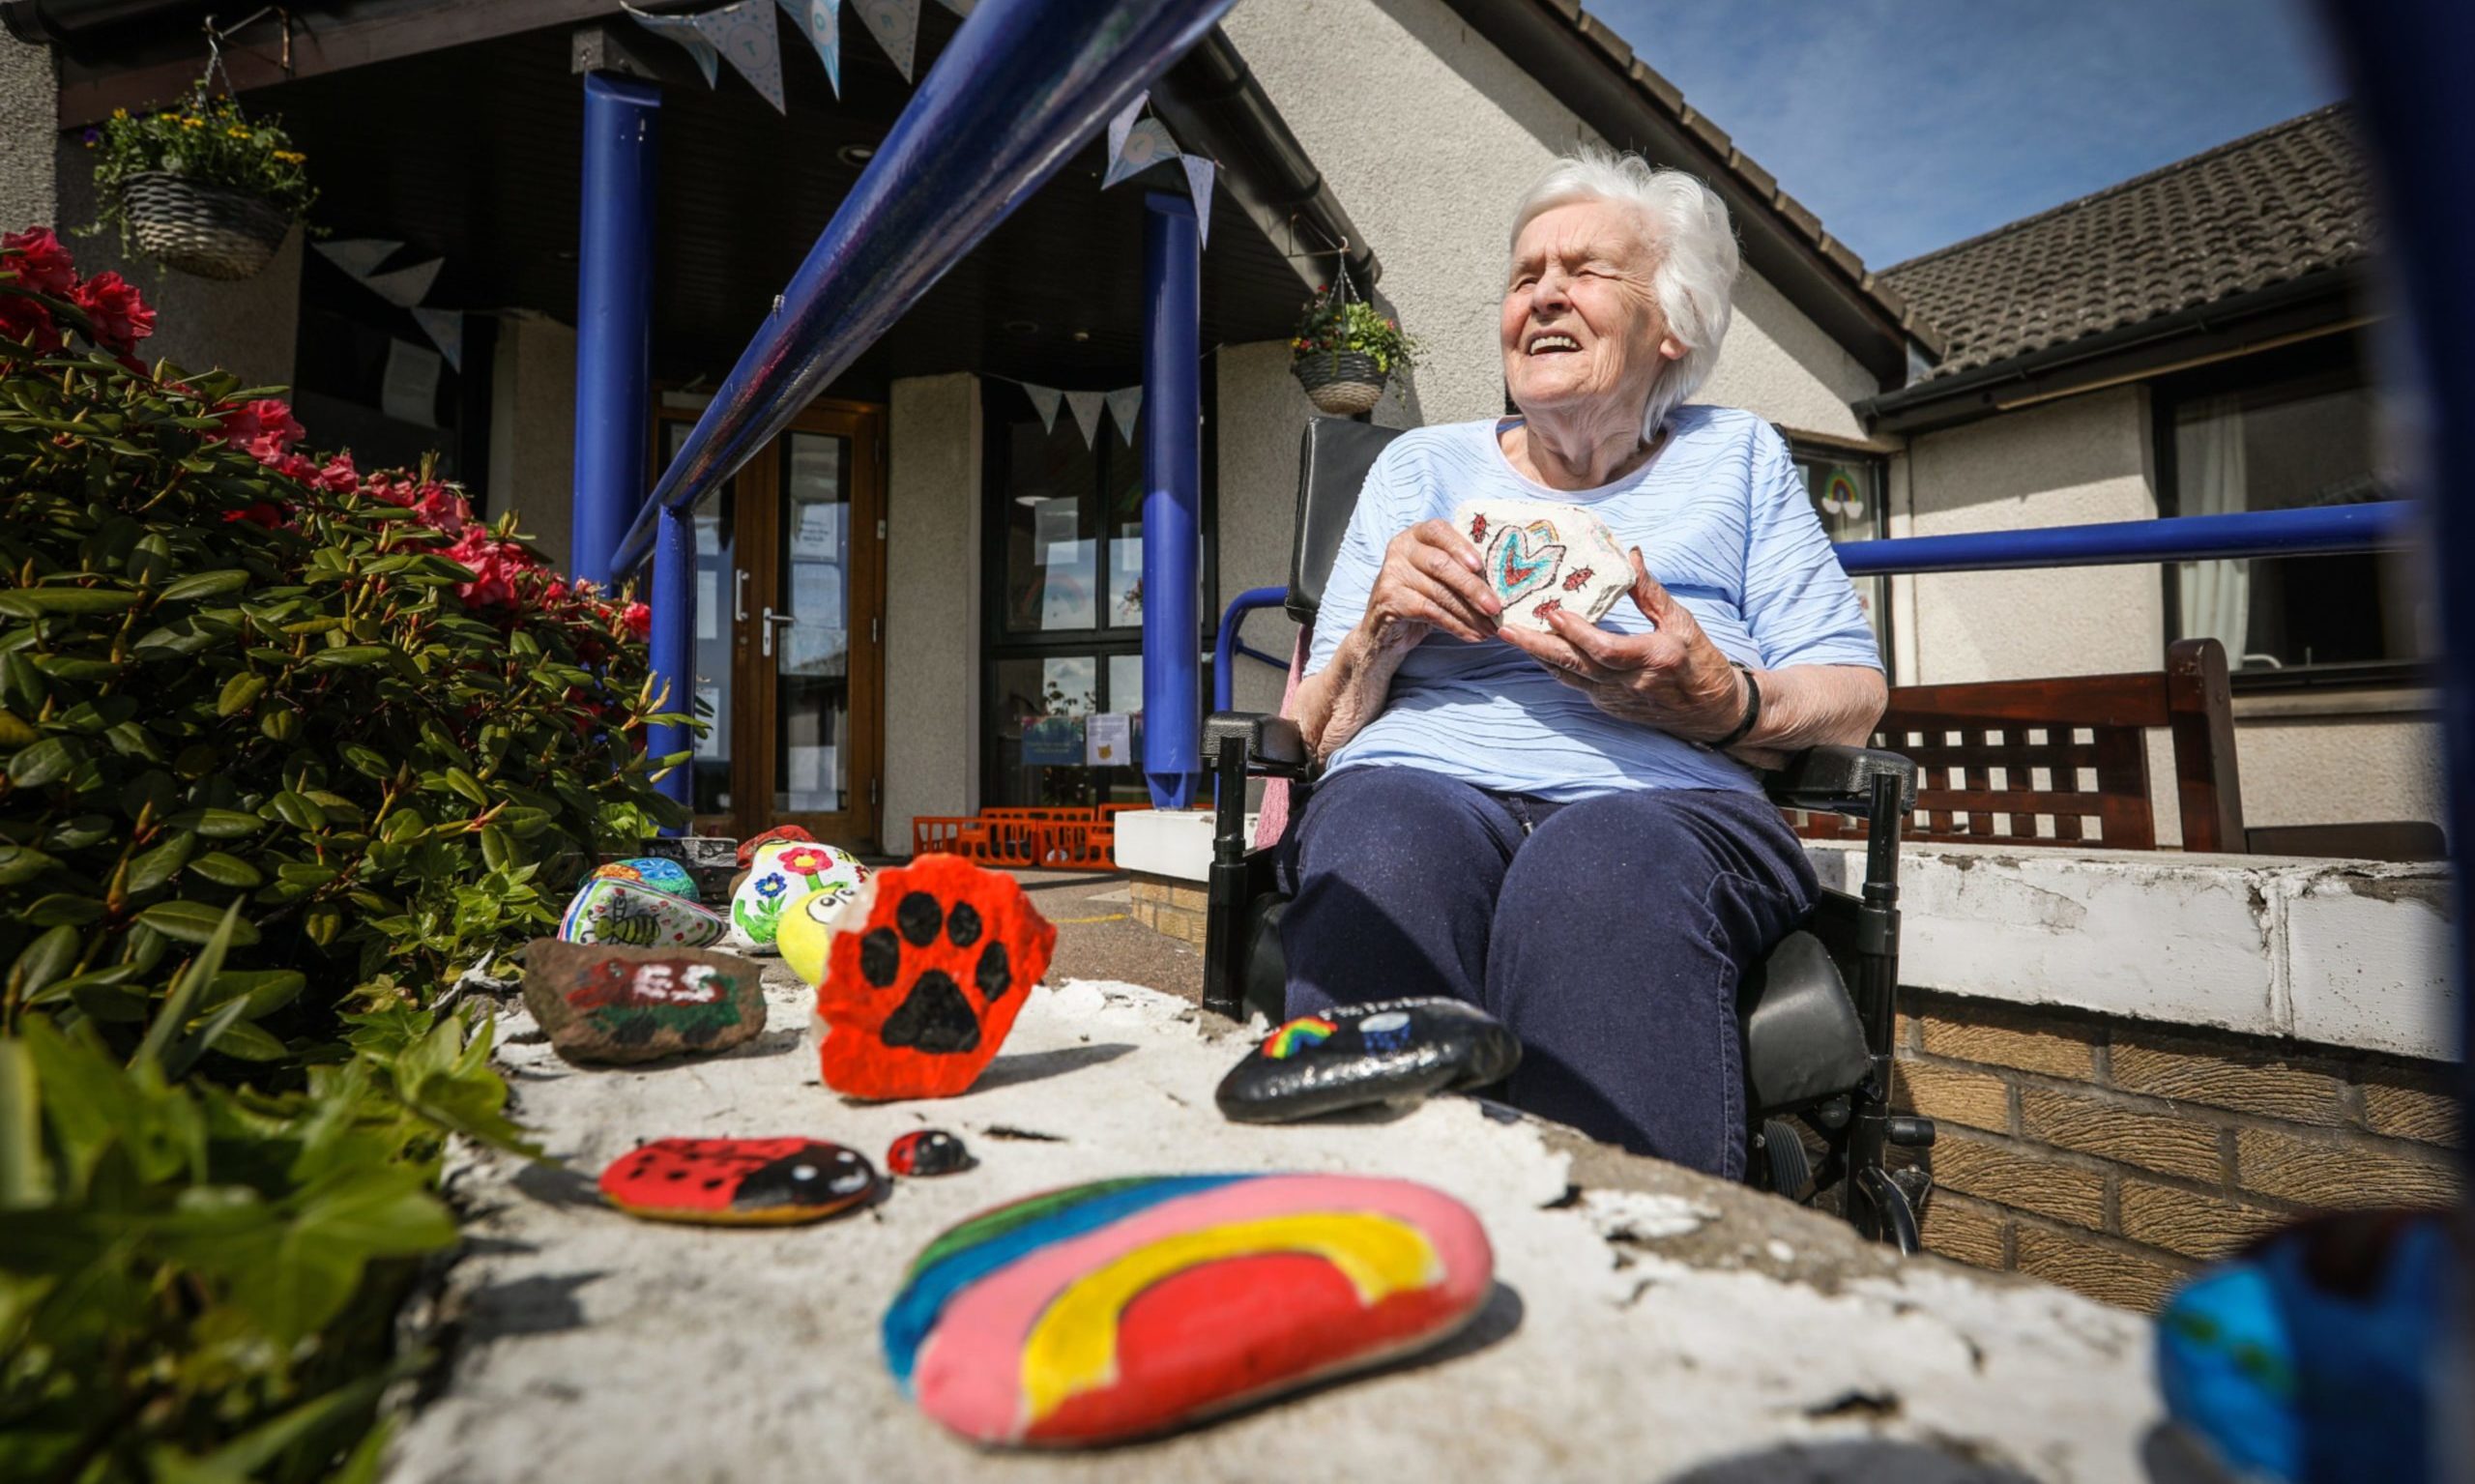 Nettie Cameron, 86, who came up with the idea with her stone that she painted and some others.